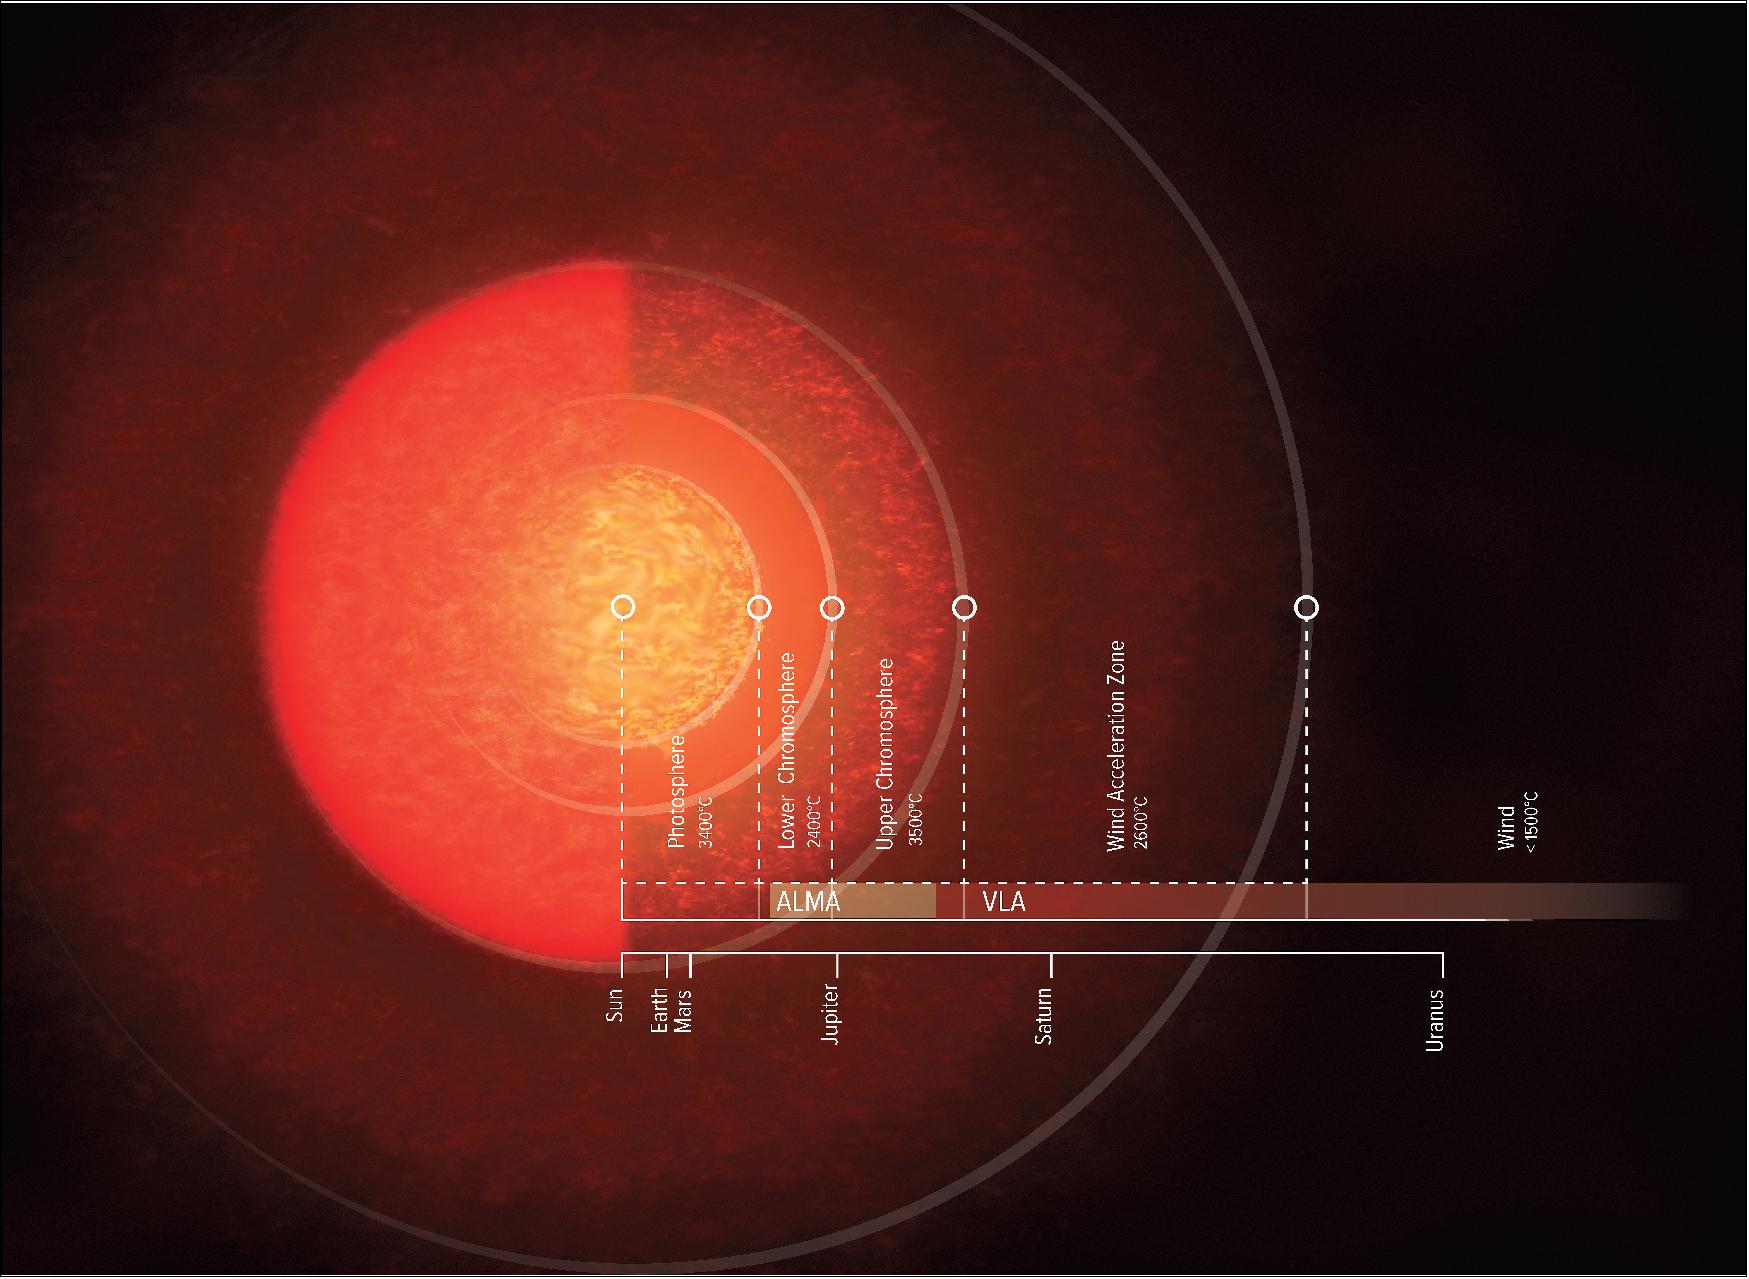 Figure 49: Artist impression of the atmosphere of Antares. As seen with the naked eye (up until the photosphere), Antares is around 700 times larger than our sun, big enough to fill the solar system beyond the orbit of Mars (Solar System scale shown for comparison). But ALMA and VLA showed that its atmosphere, including the lower and upper chromosphere and wind zones, reaches out 12 times farther than that (image credit: NRAO/AUI/NSF, S. Dagnello)